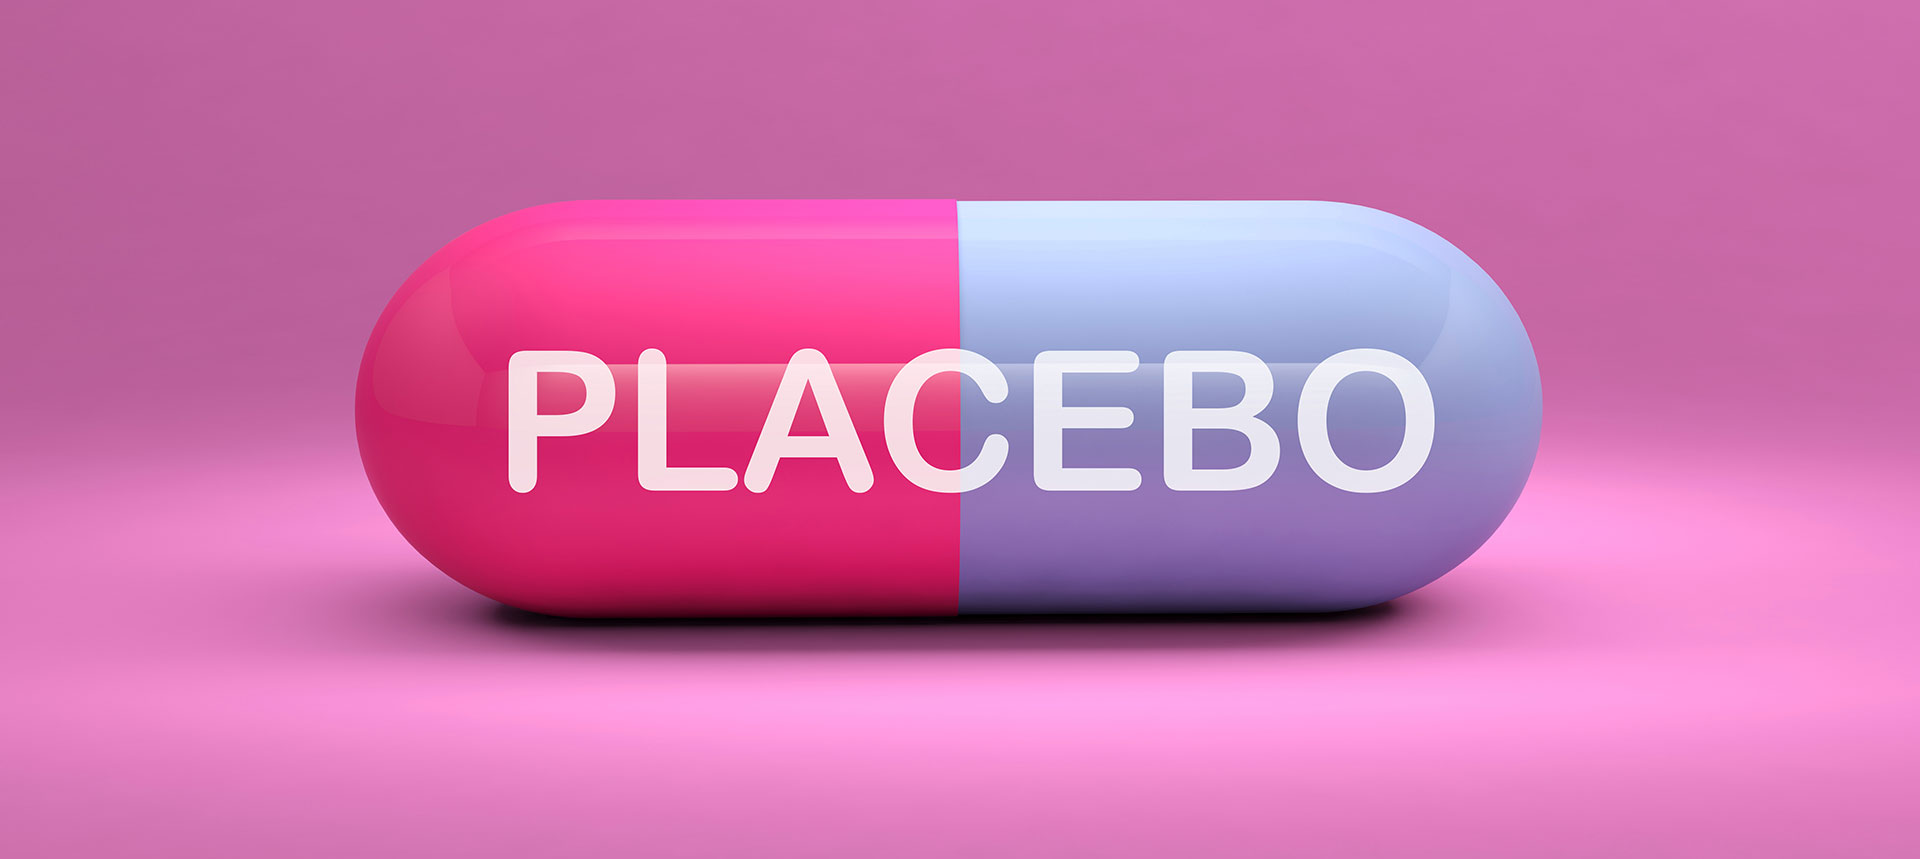 The Placebo Effect On Health